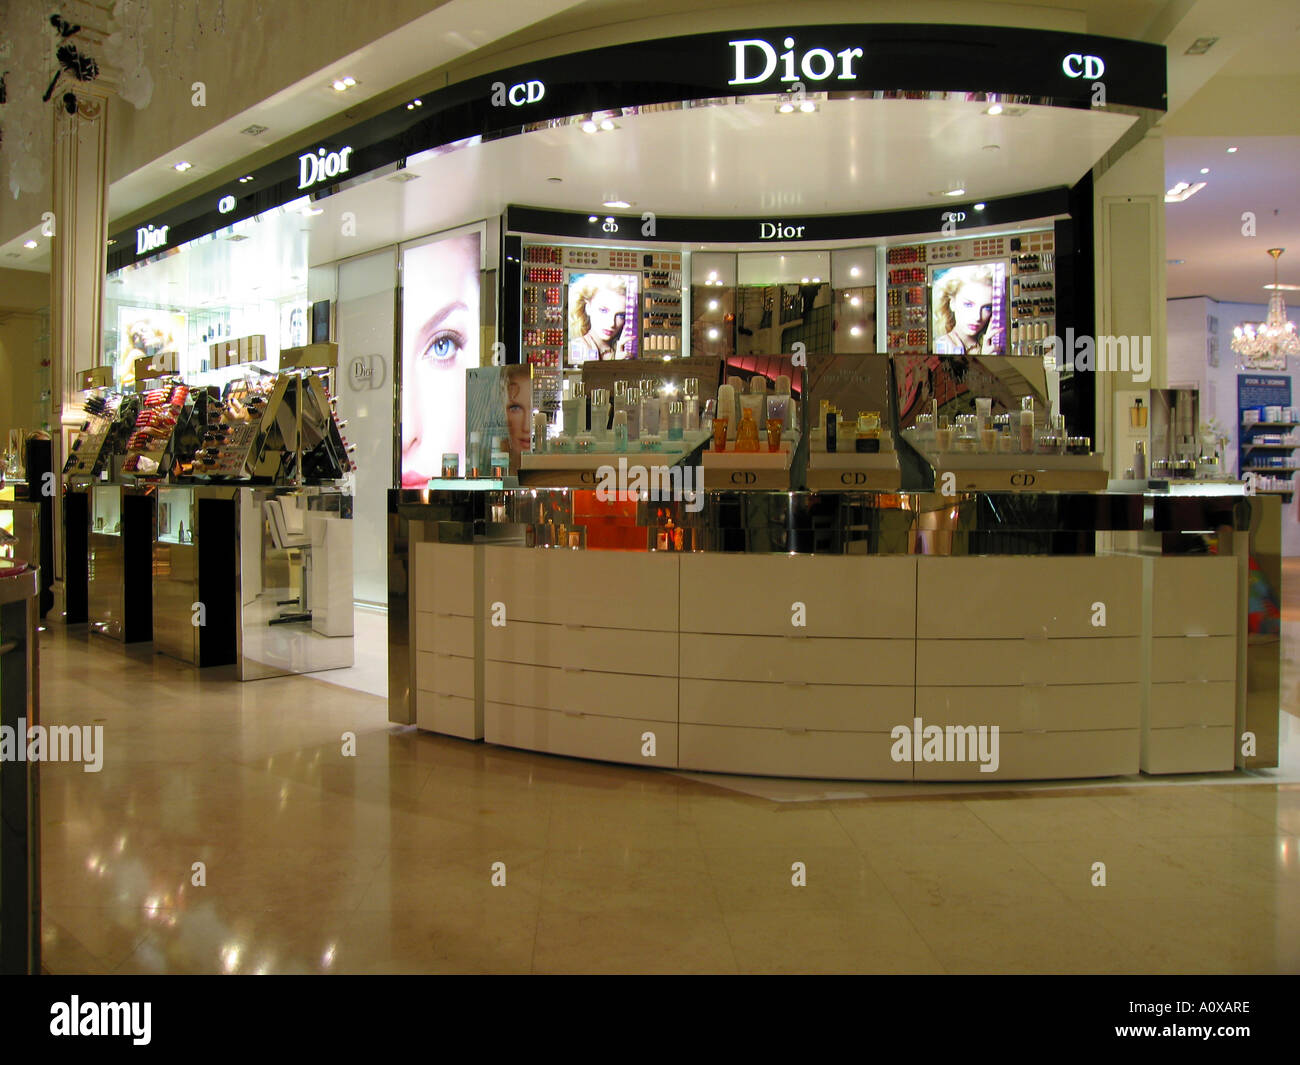 Dior perfume counter in a department store Stock Photo - Alamy